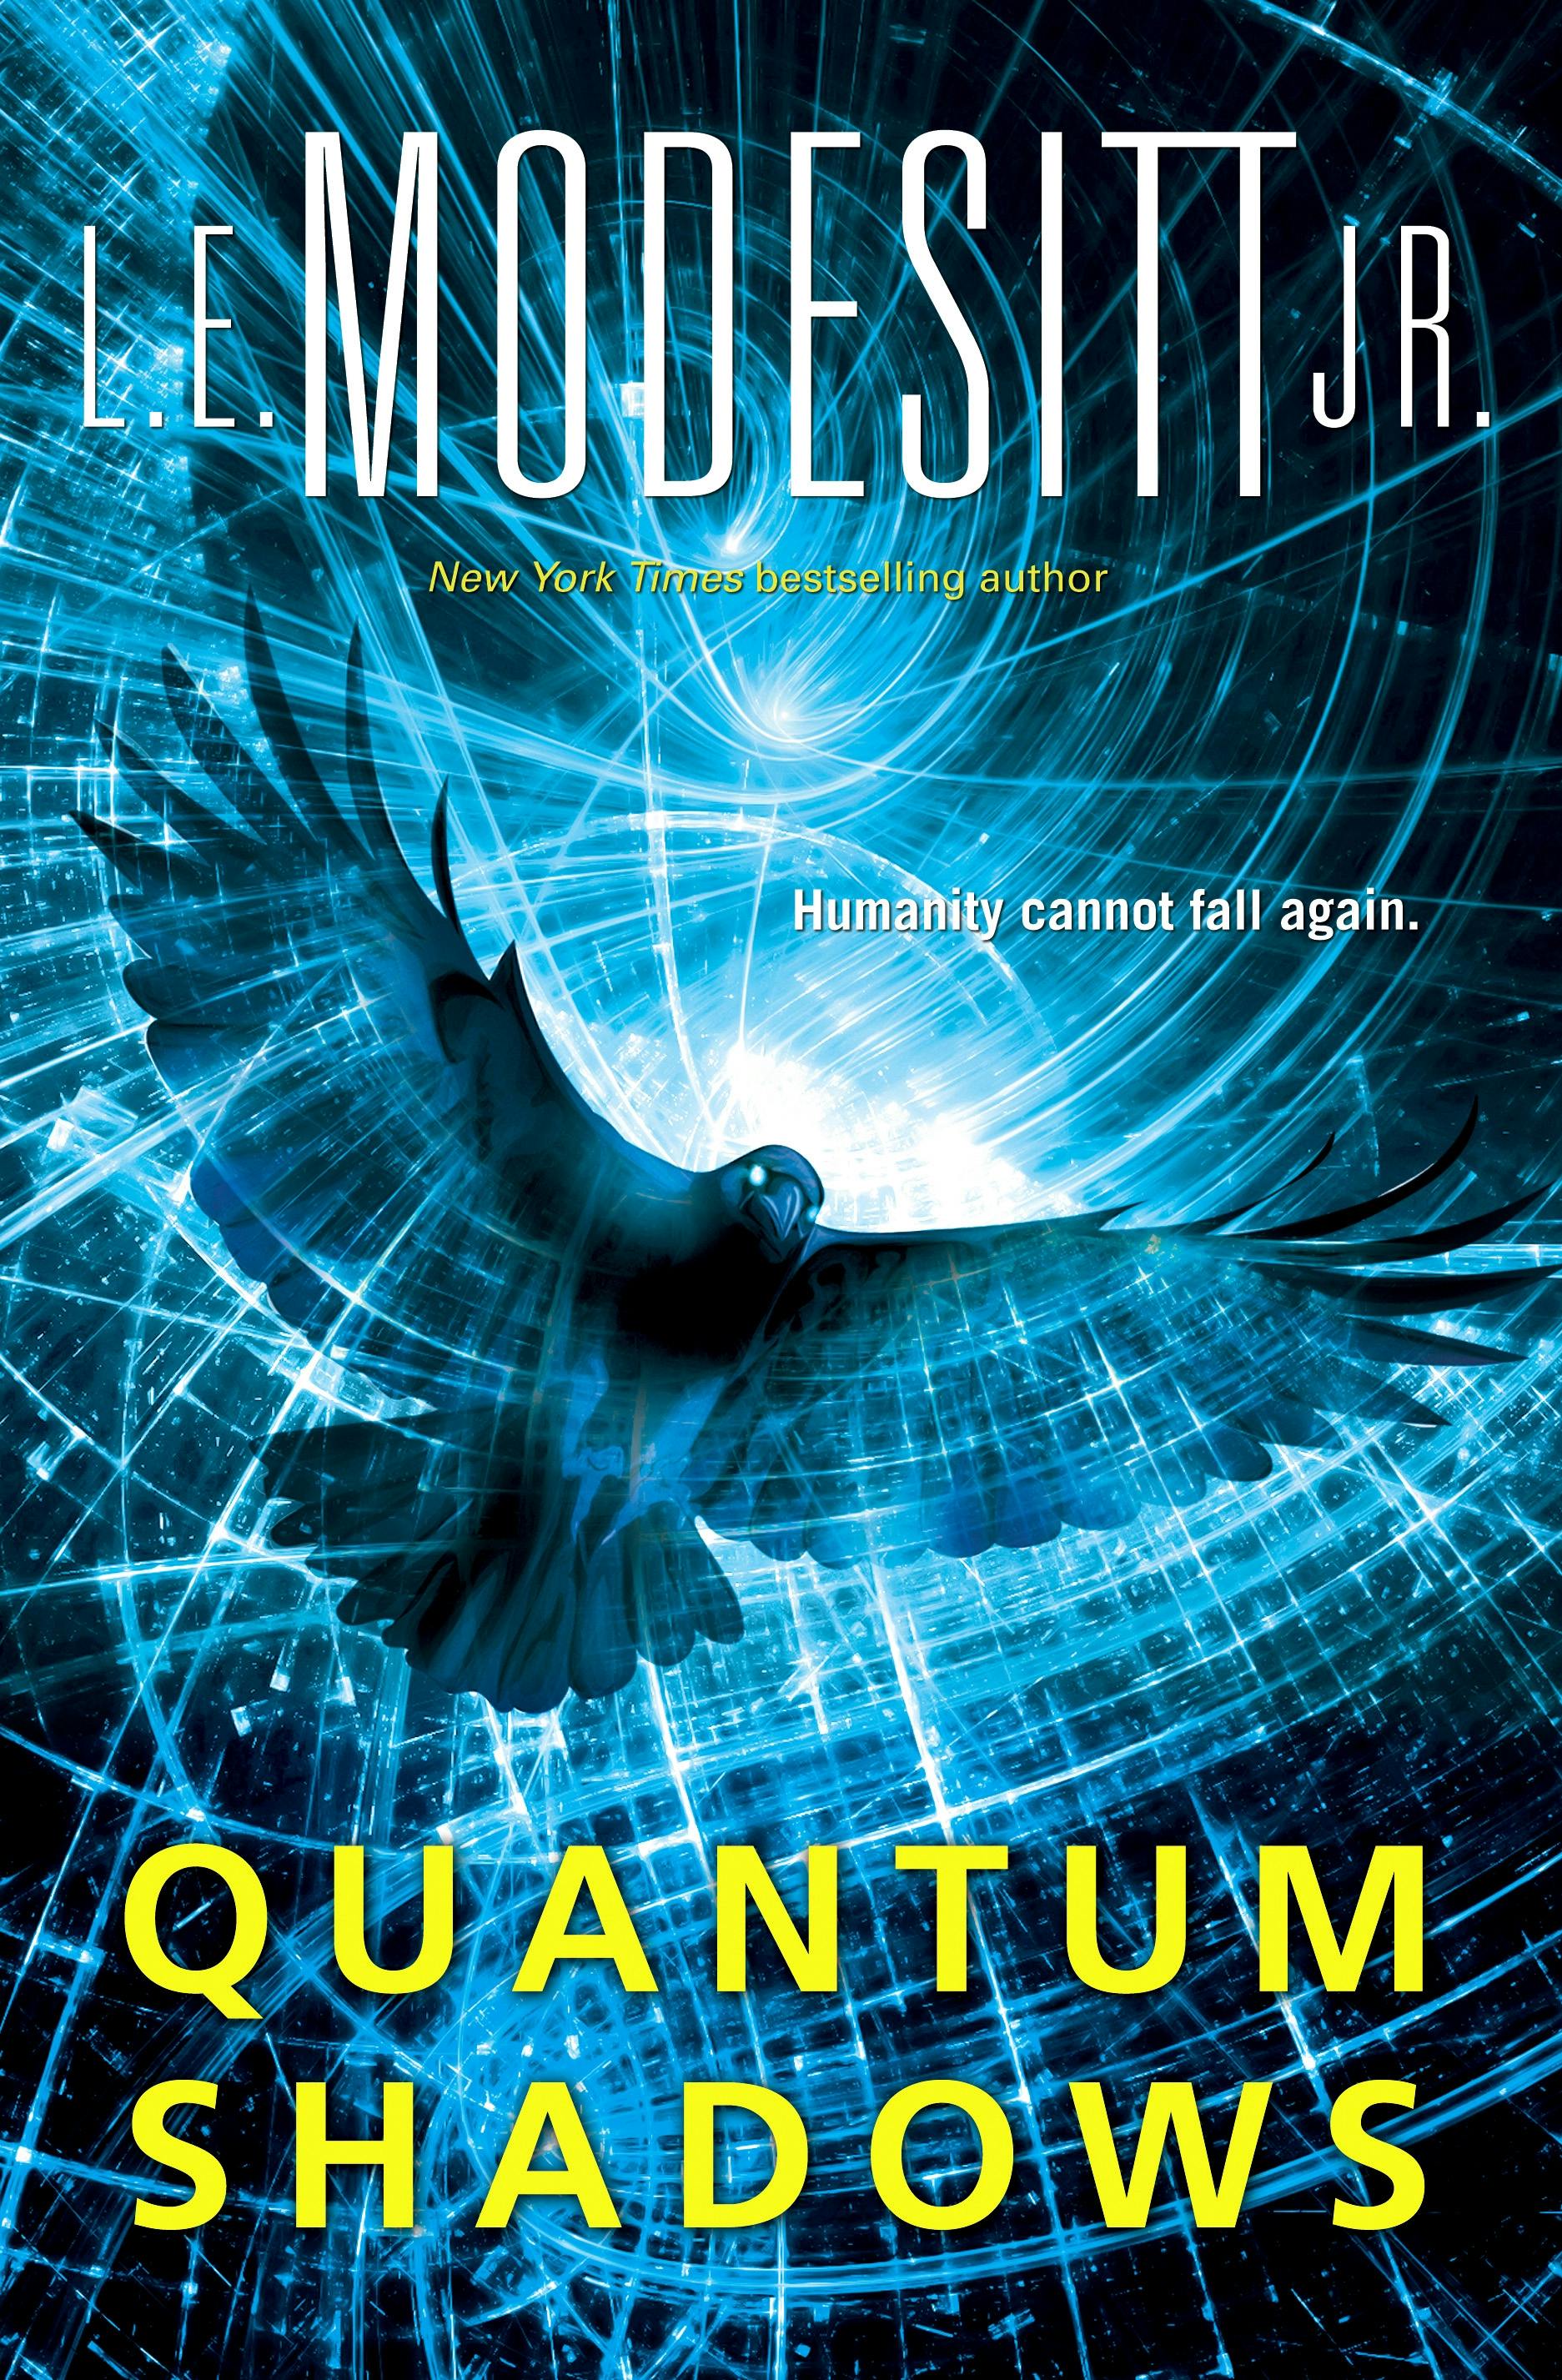 Cover for the book titled as: Quantum Shadows